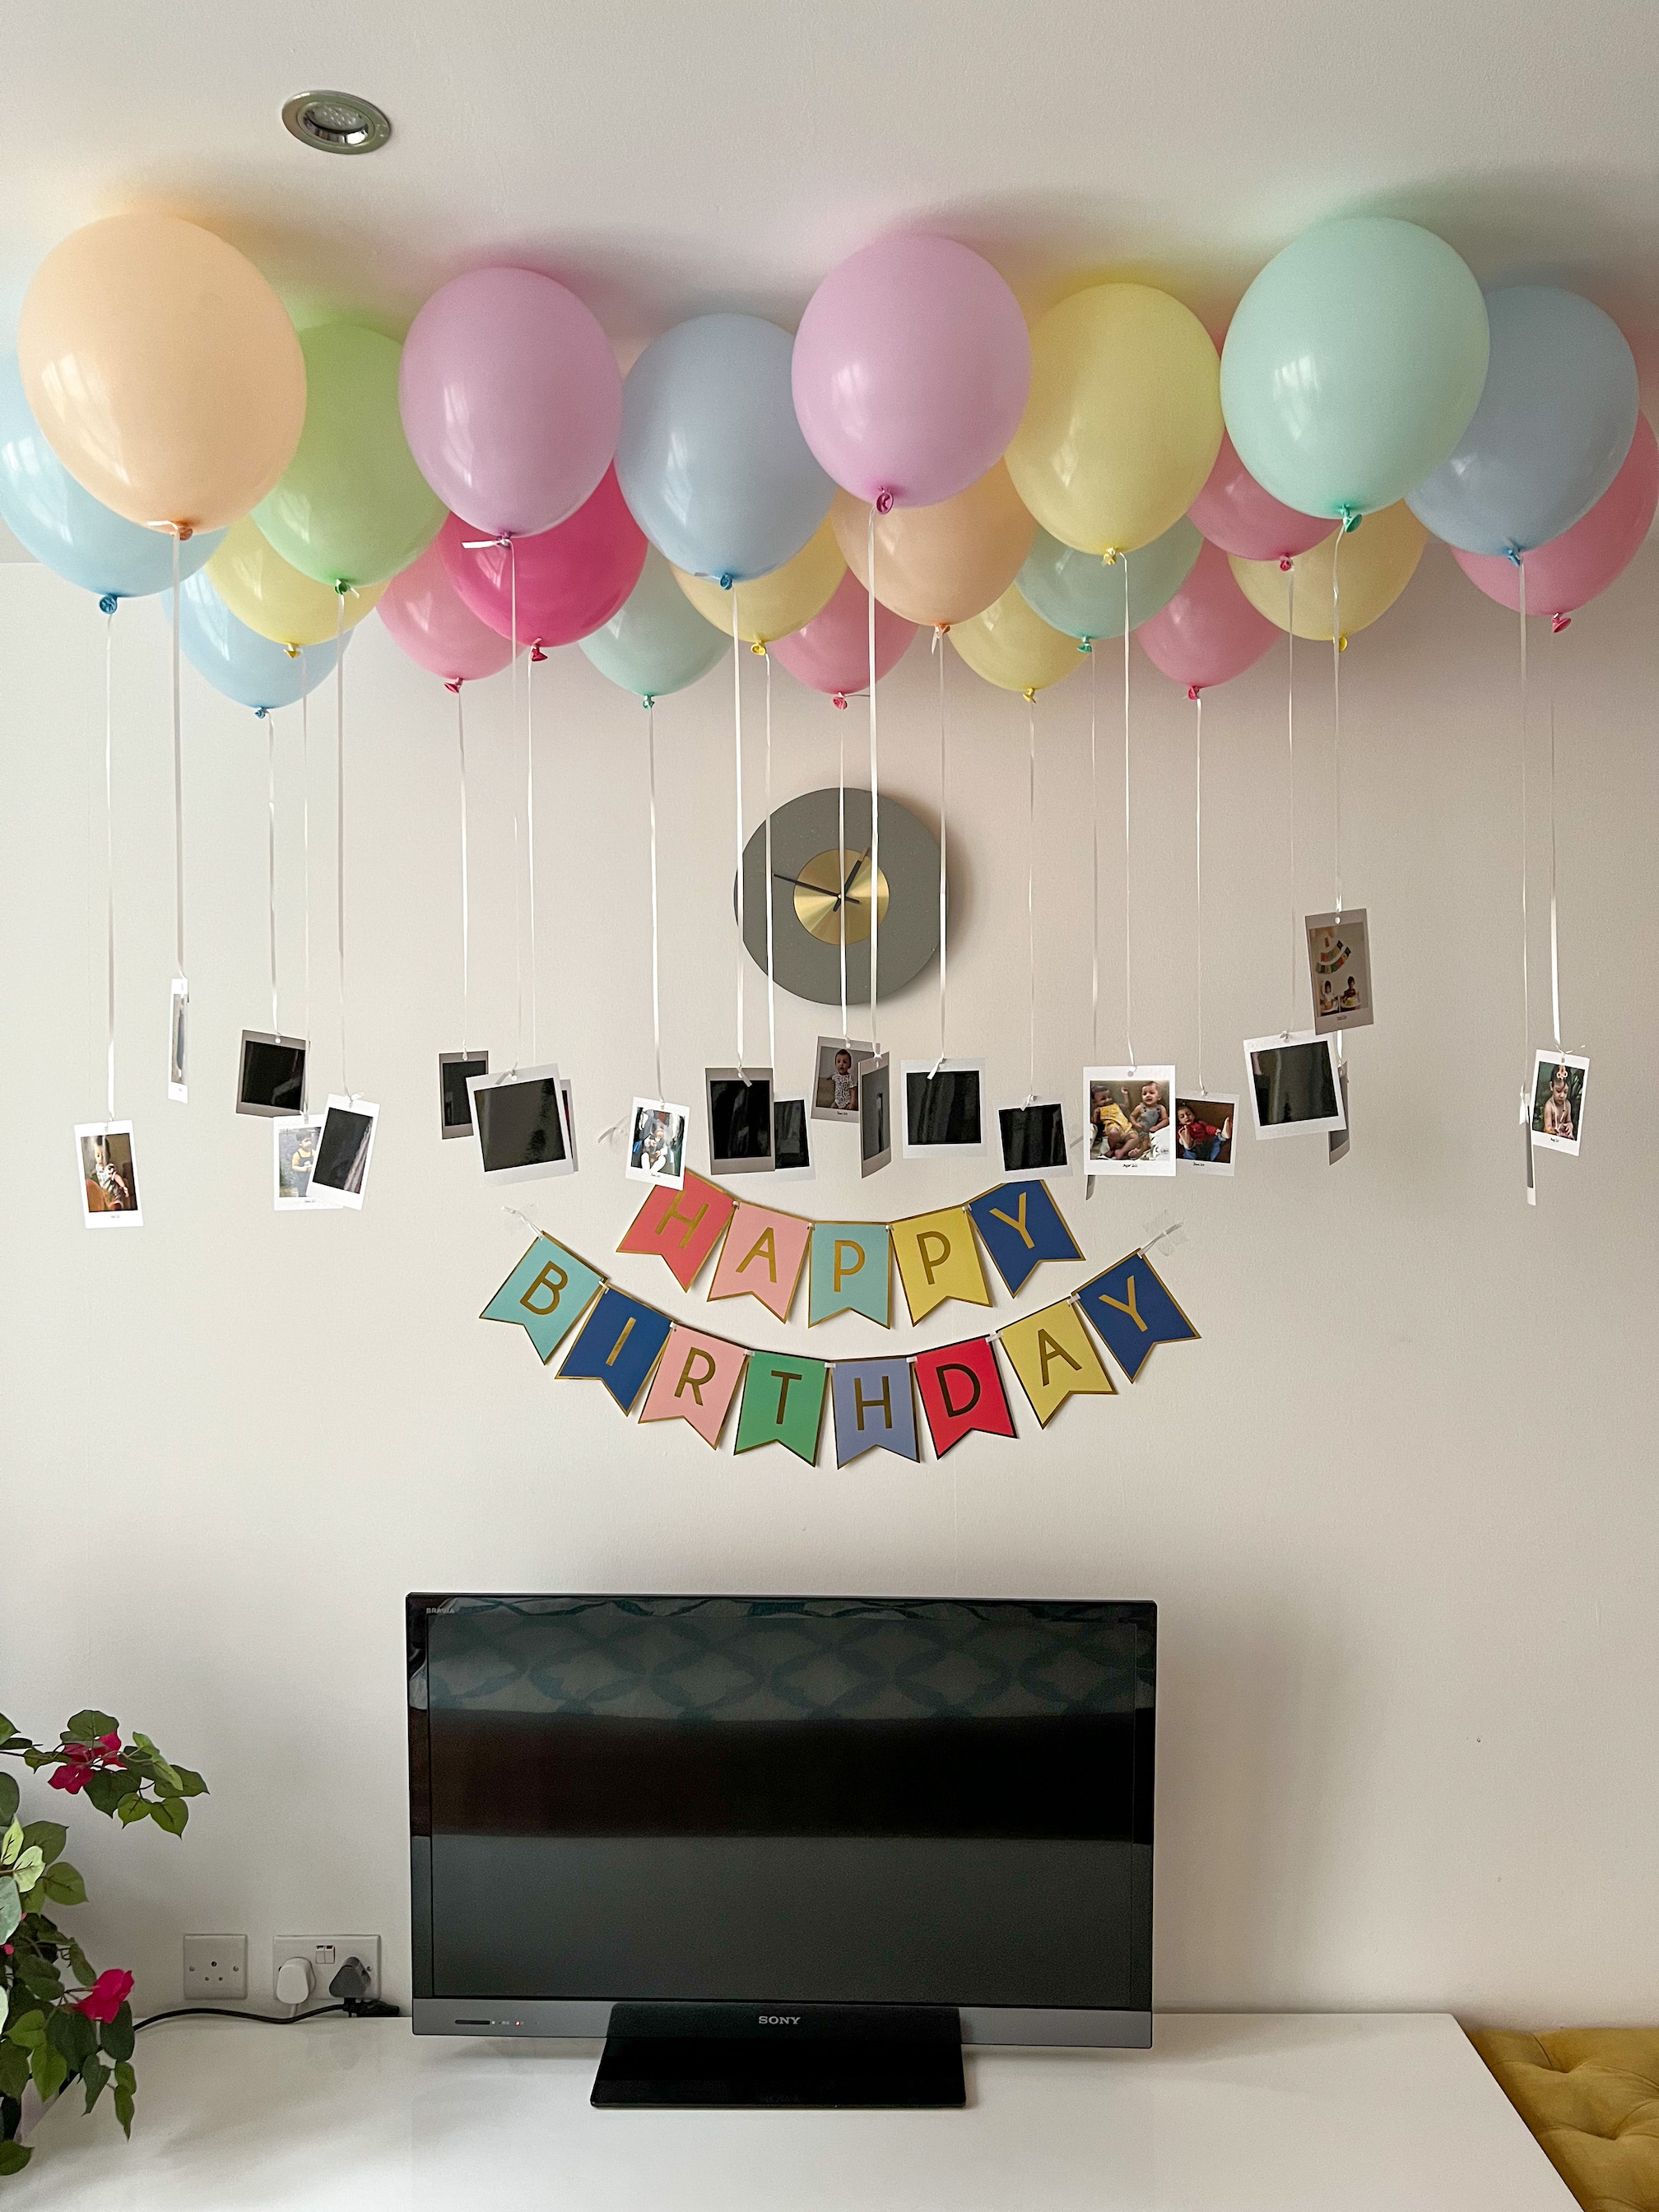 Balloon themed party decorations